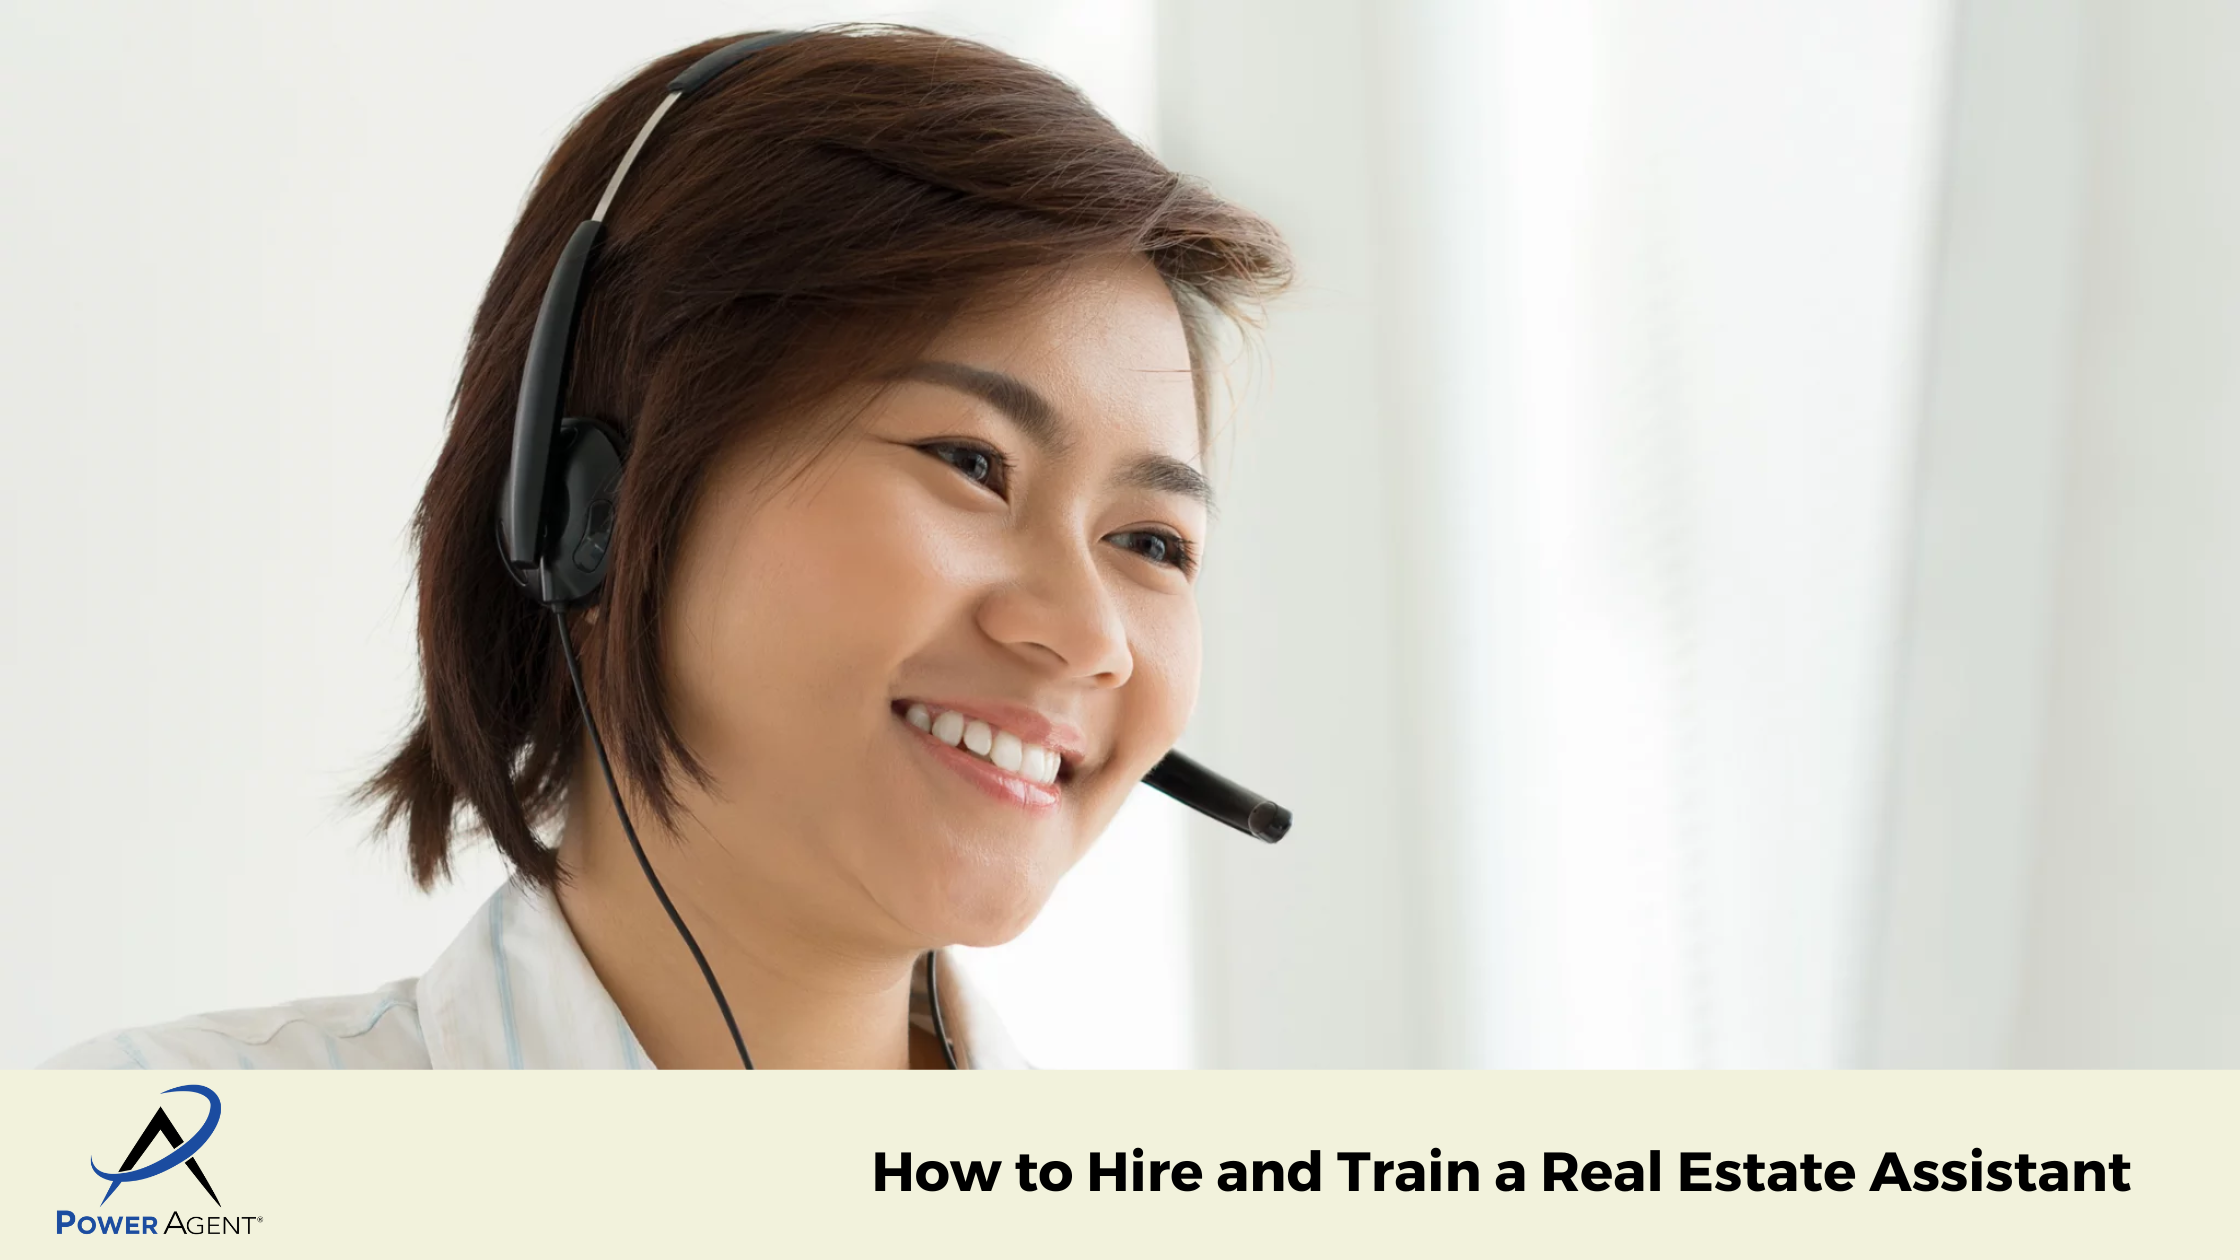 How to Hire and Train a Real Estate Assistant